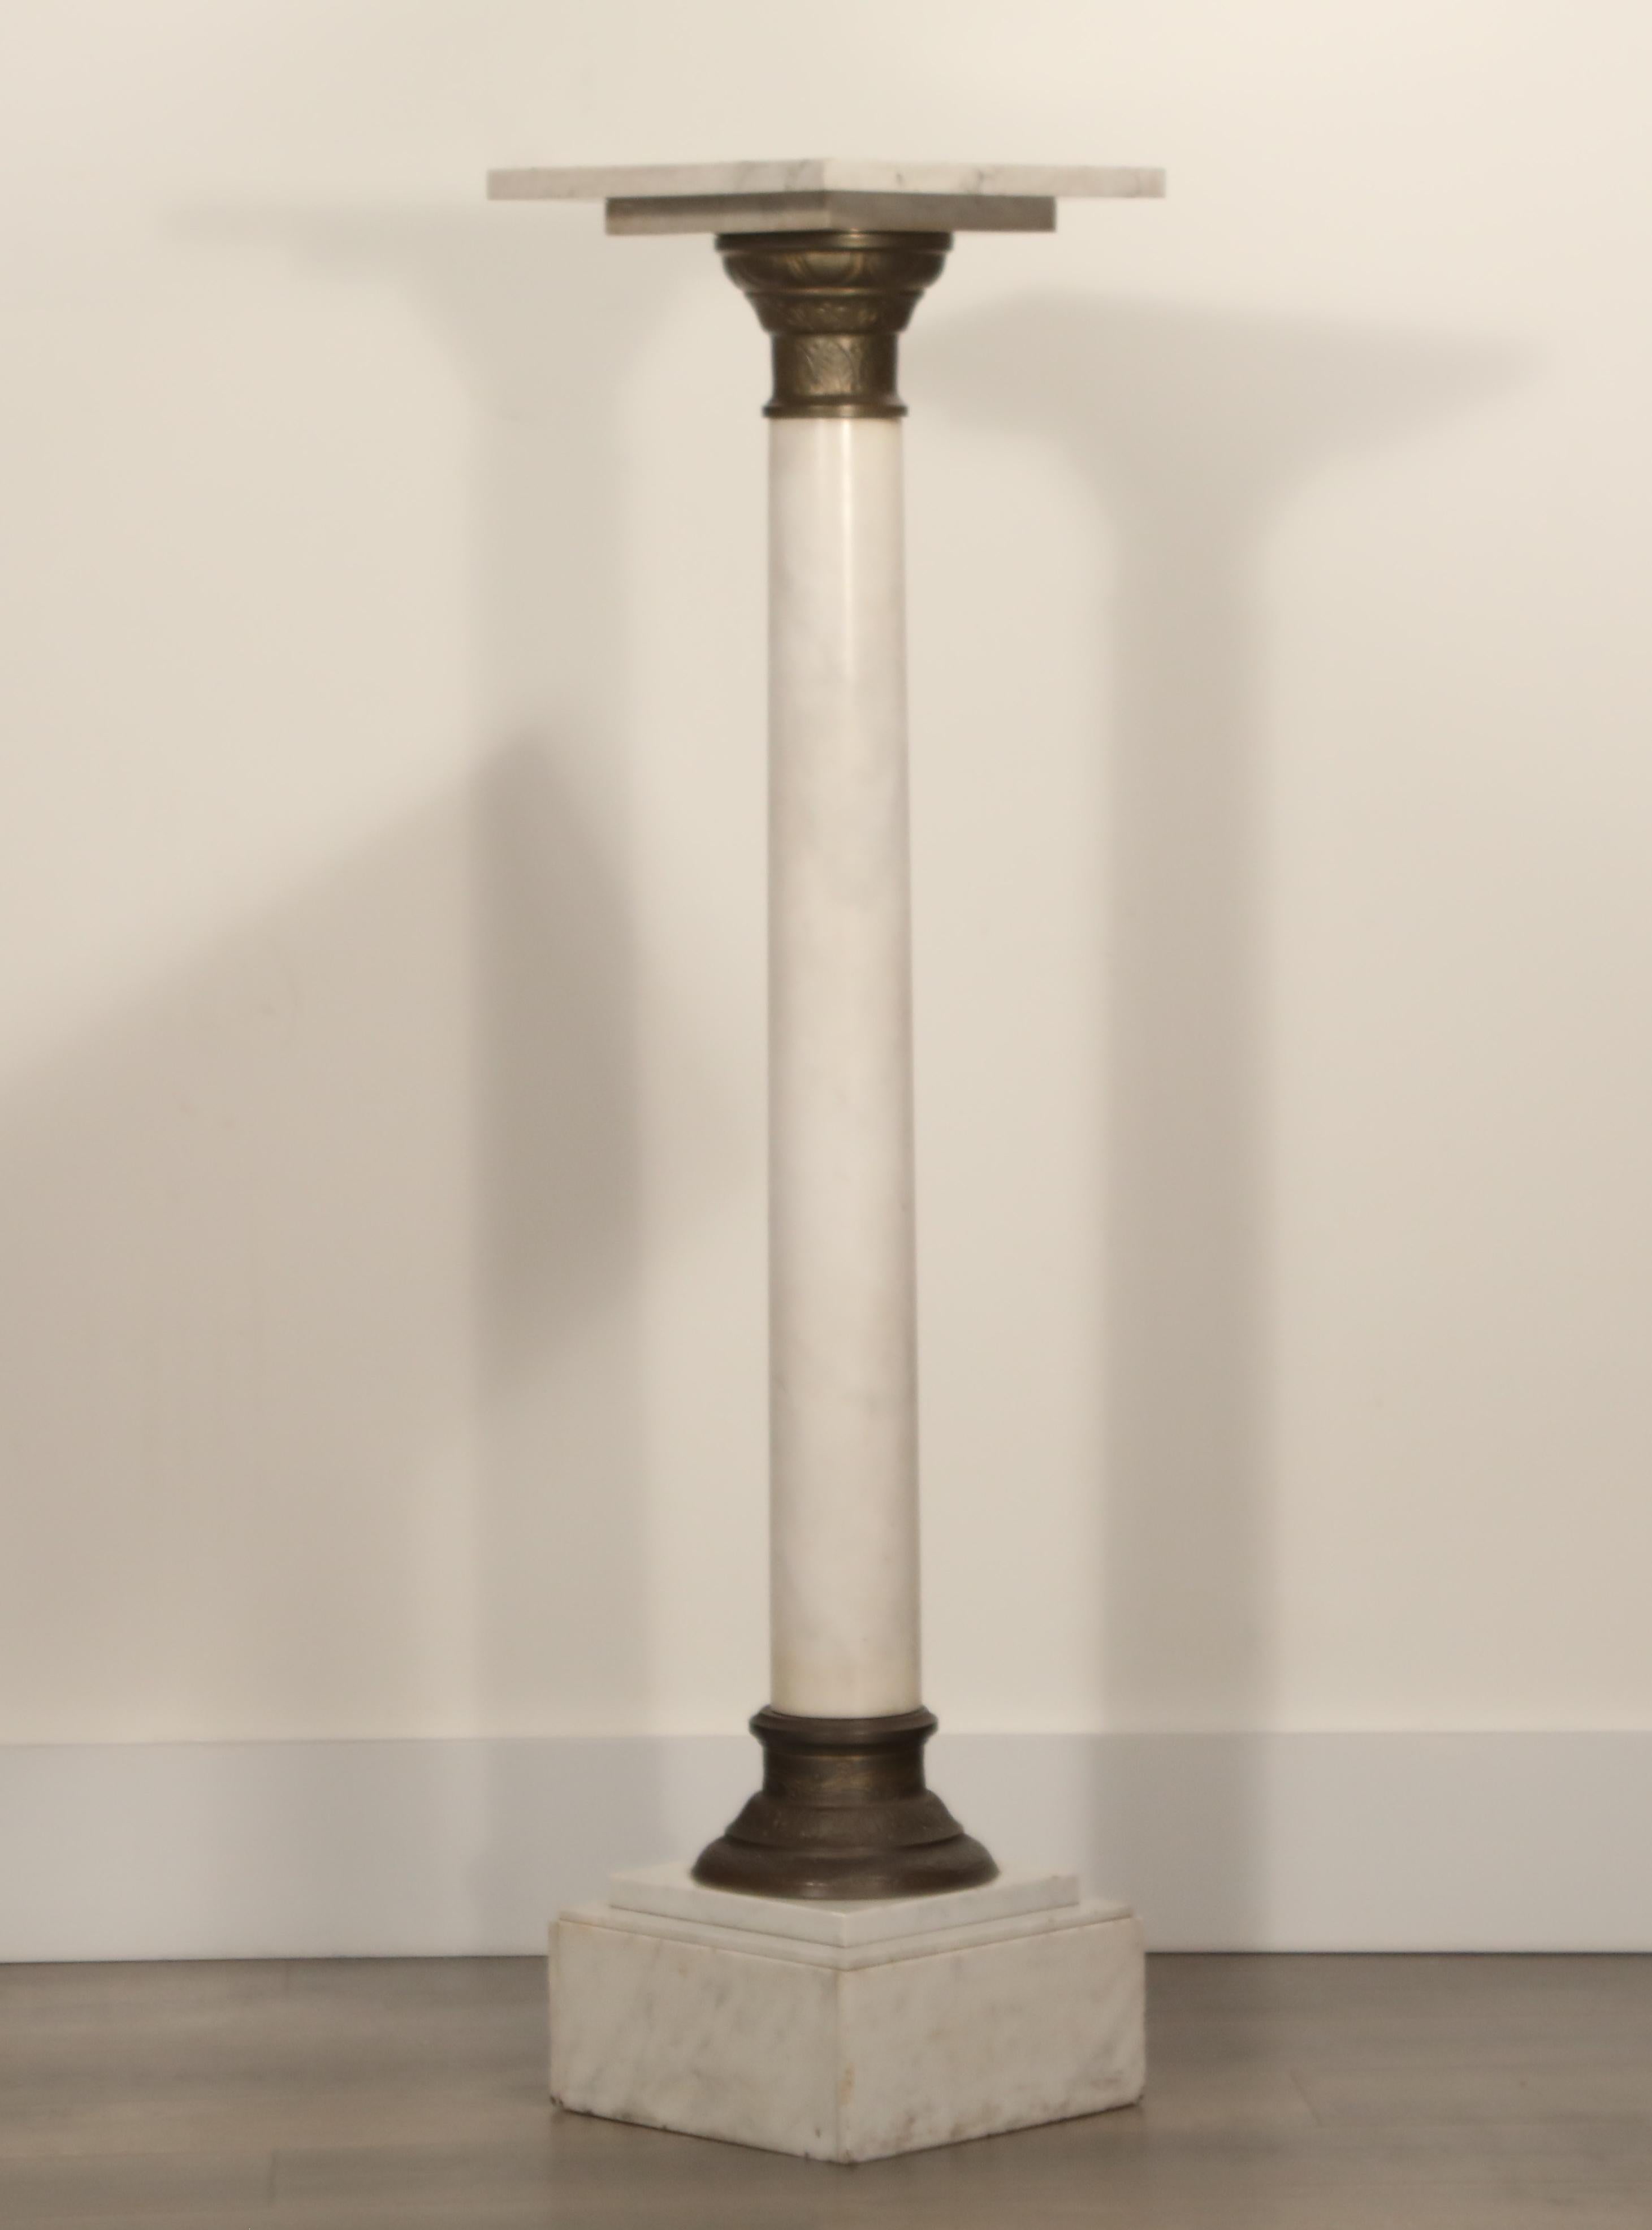 A classic 1930s Art Deco marble and patinated metal column pedestal. The square marble top perches over a columnar support raised on a stepped terraced marble base and set with patinated metal mounts. 

Consider using this as a floor stand for a